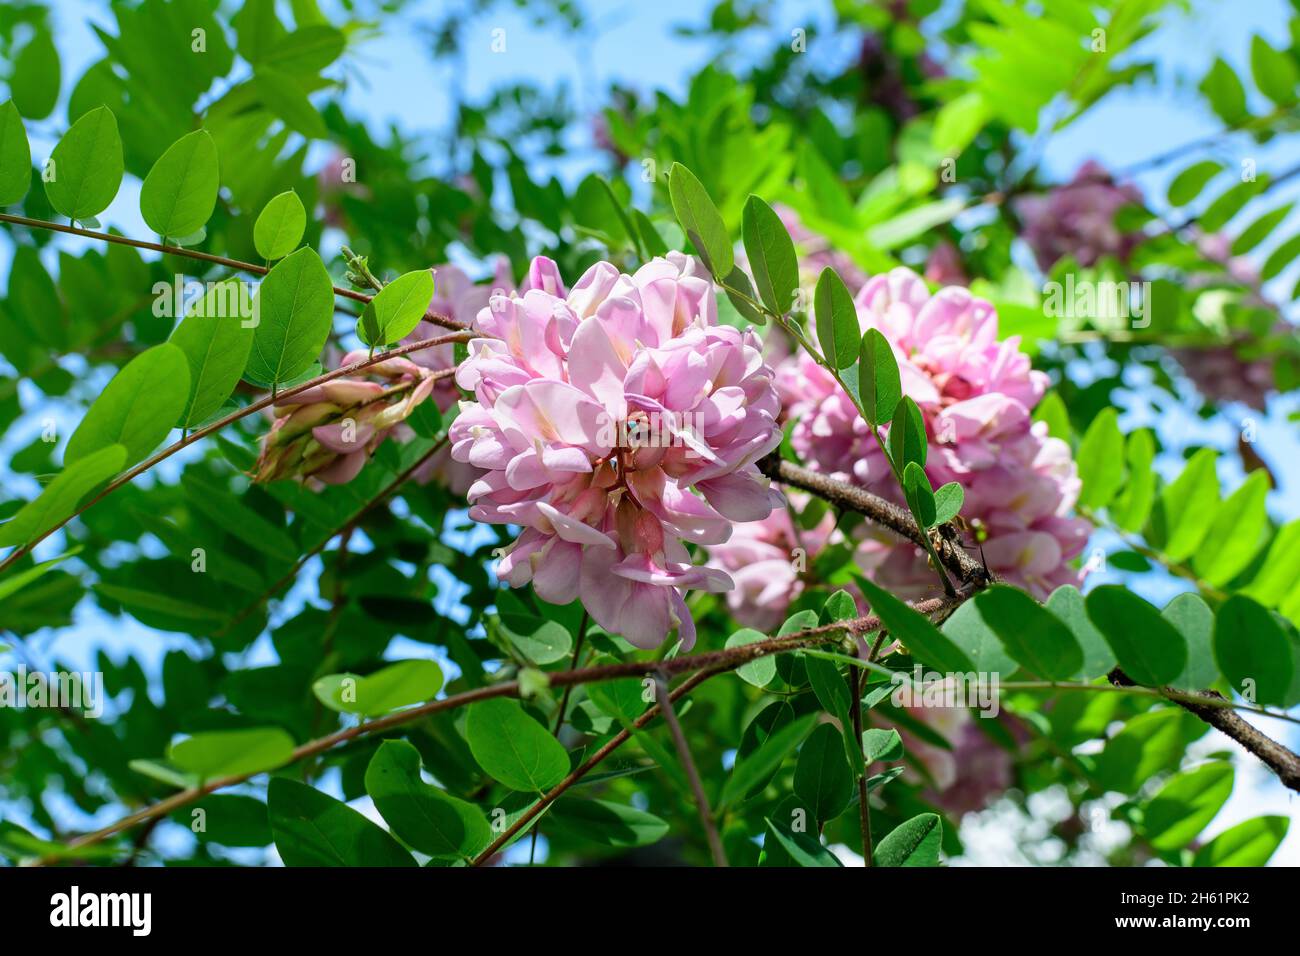 Pink flowers of Robinia margaretta Casque Rouge tree commonly known as locust, and green leaves in a summer garden, beautiful outdoor floral backgroun Stock Photo